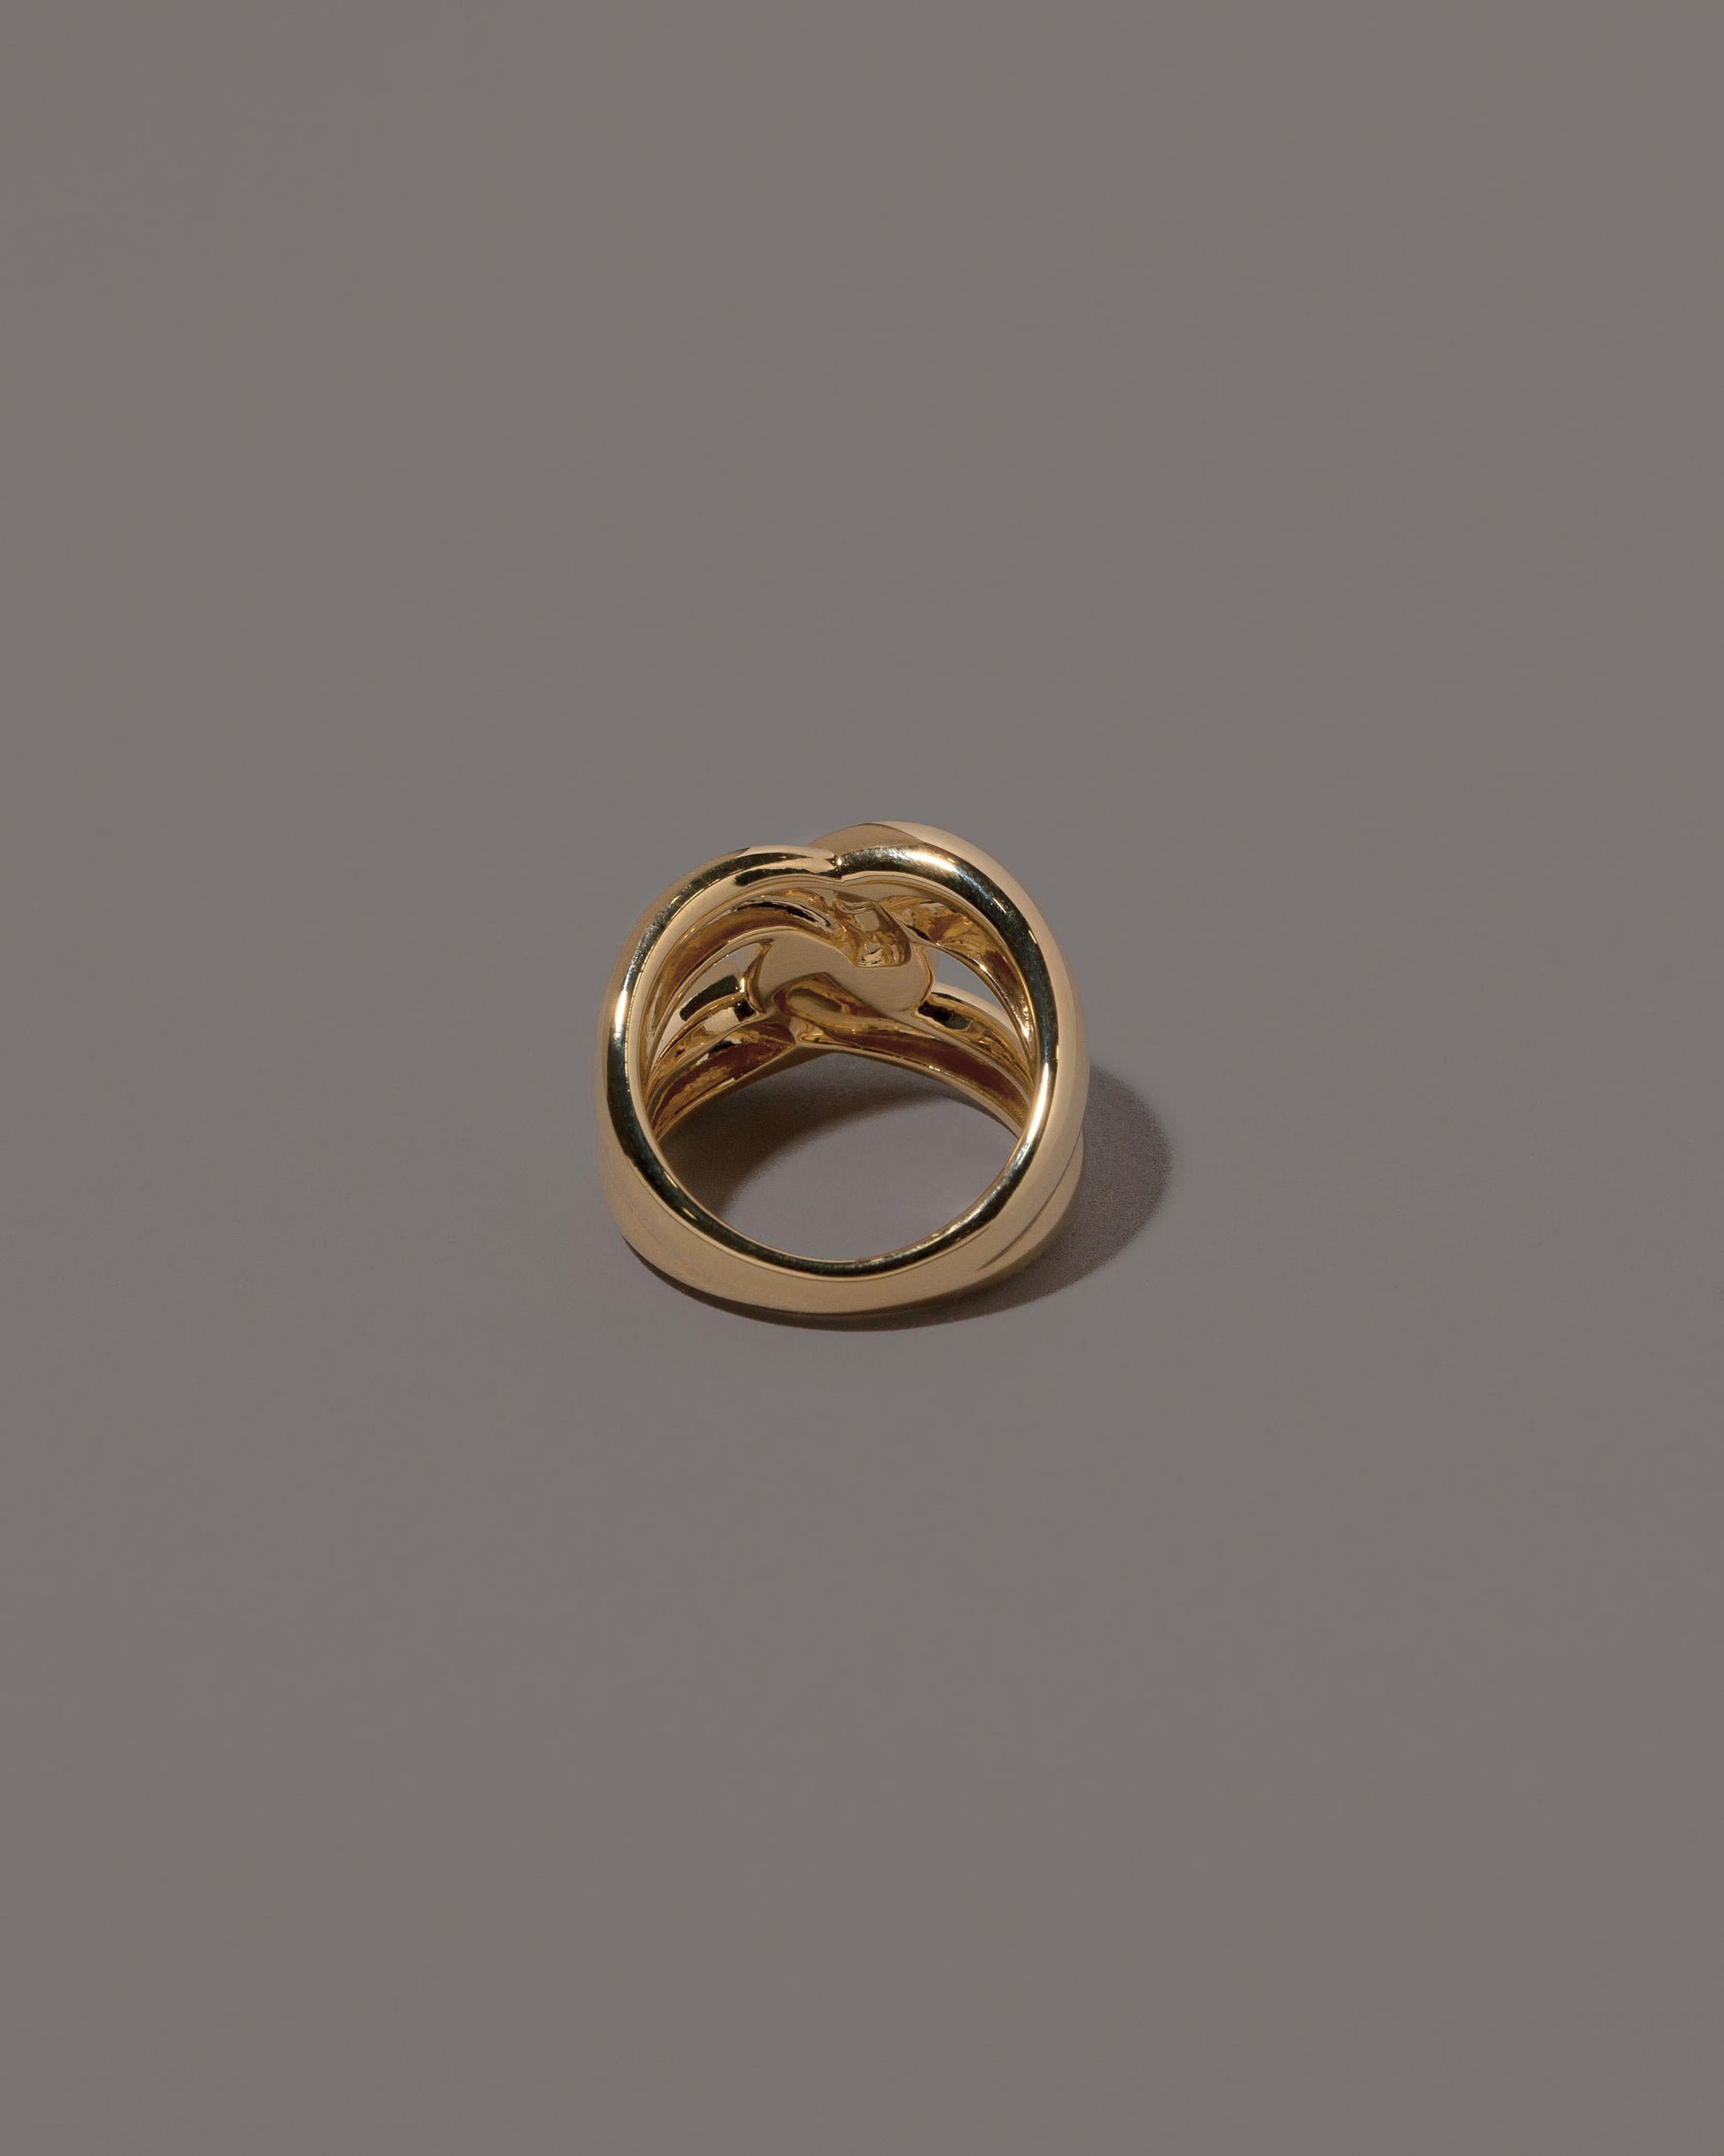 View from the back of the One Ring on grey color background.